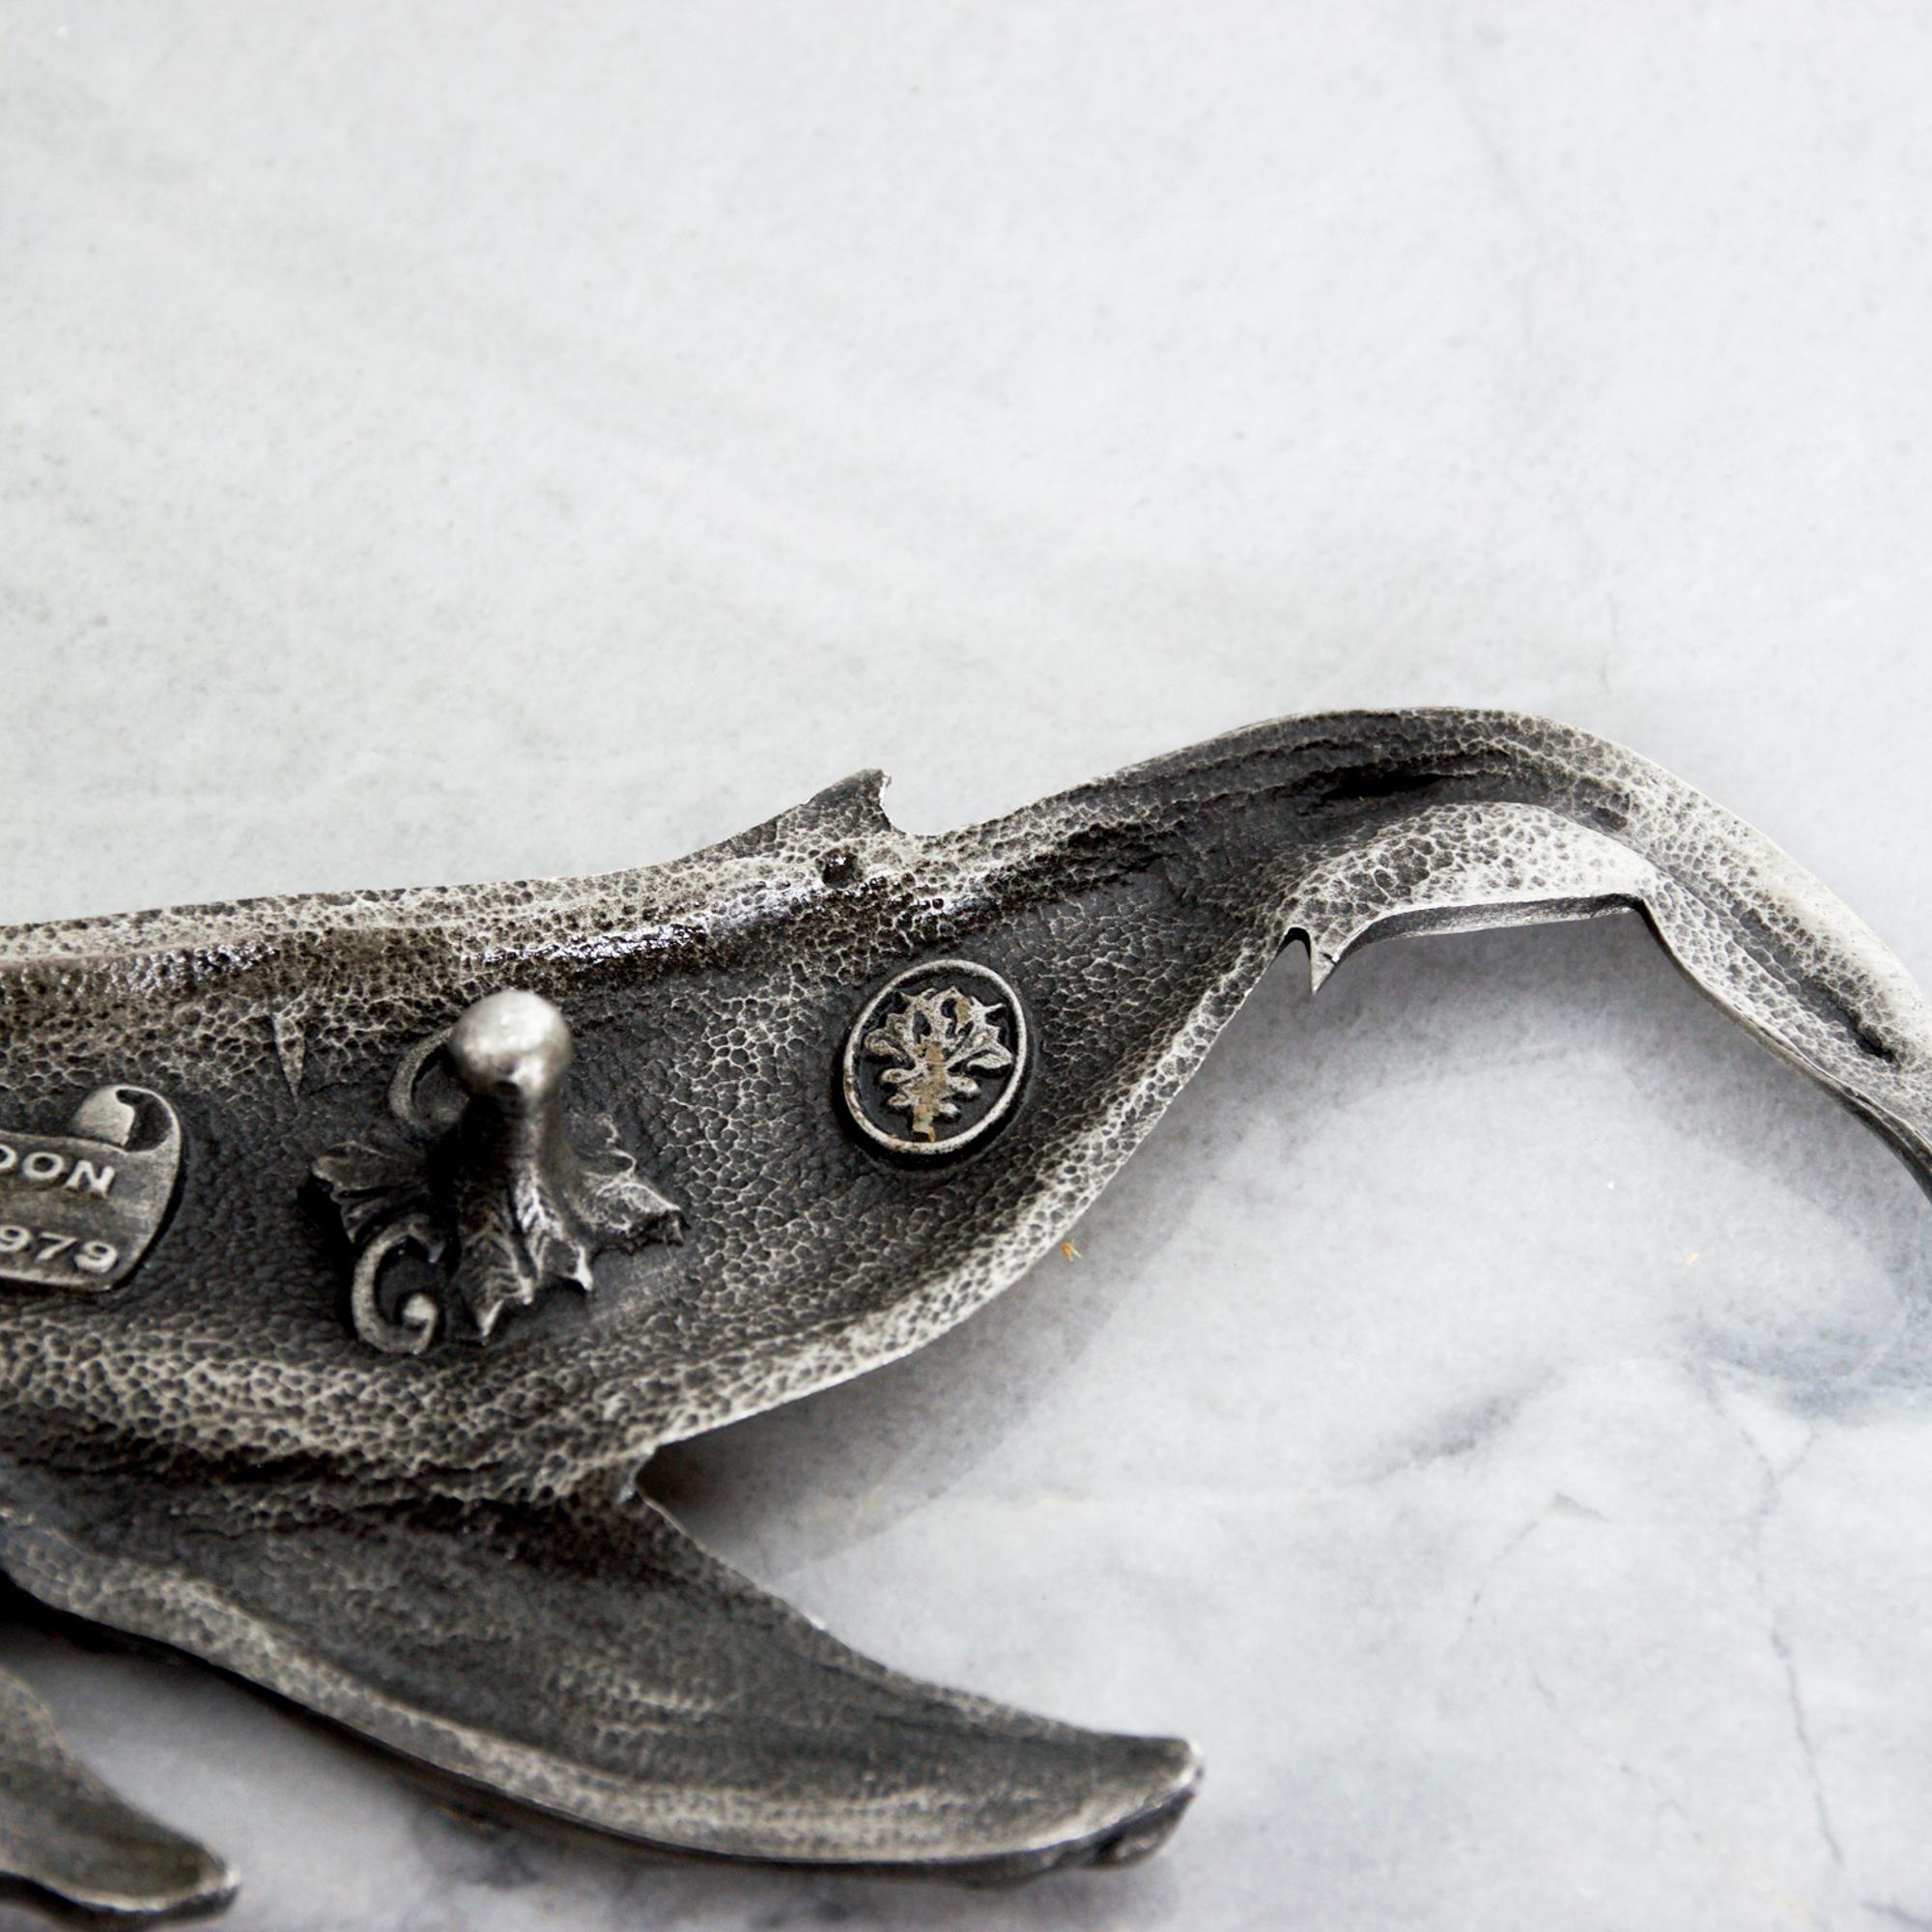 Late 20th Century Fine Pewter Humpback Whale Belt Buckle by Vinegarroon 1979 Vintage Steampunk